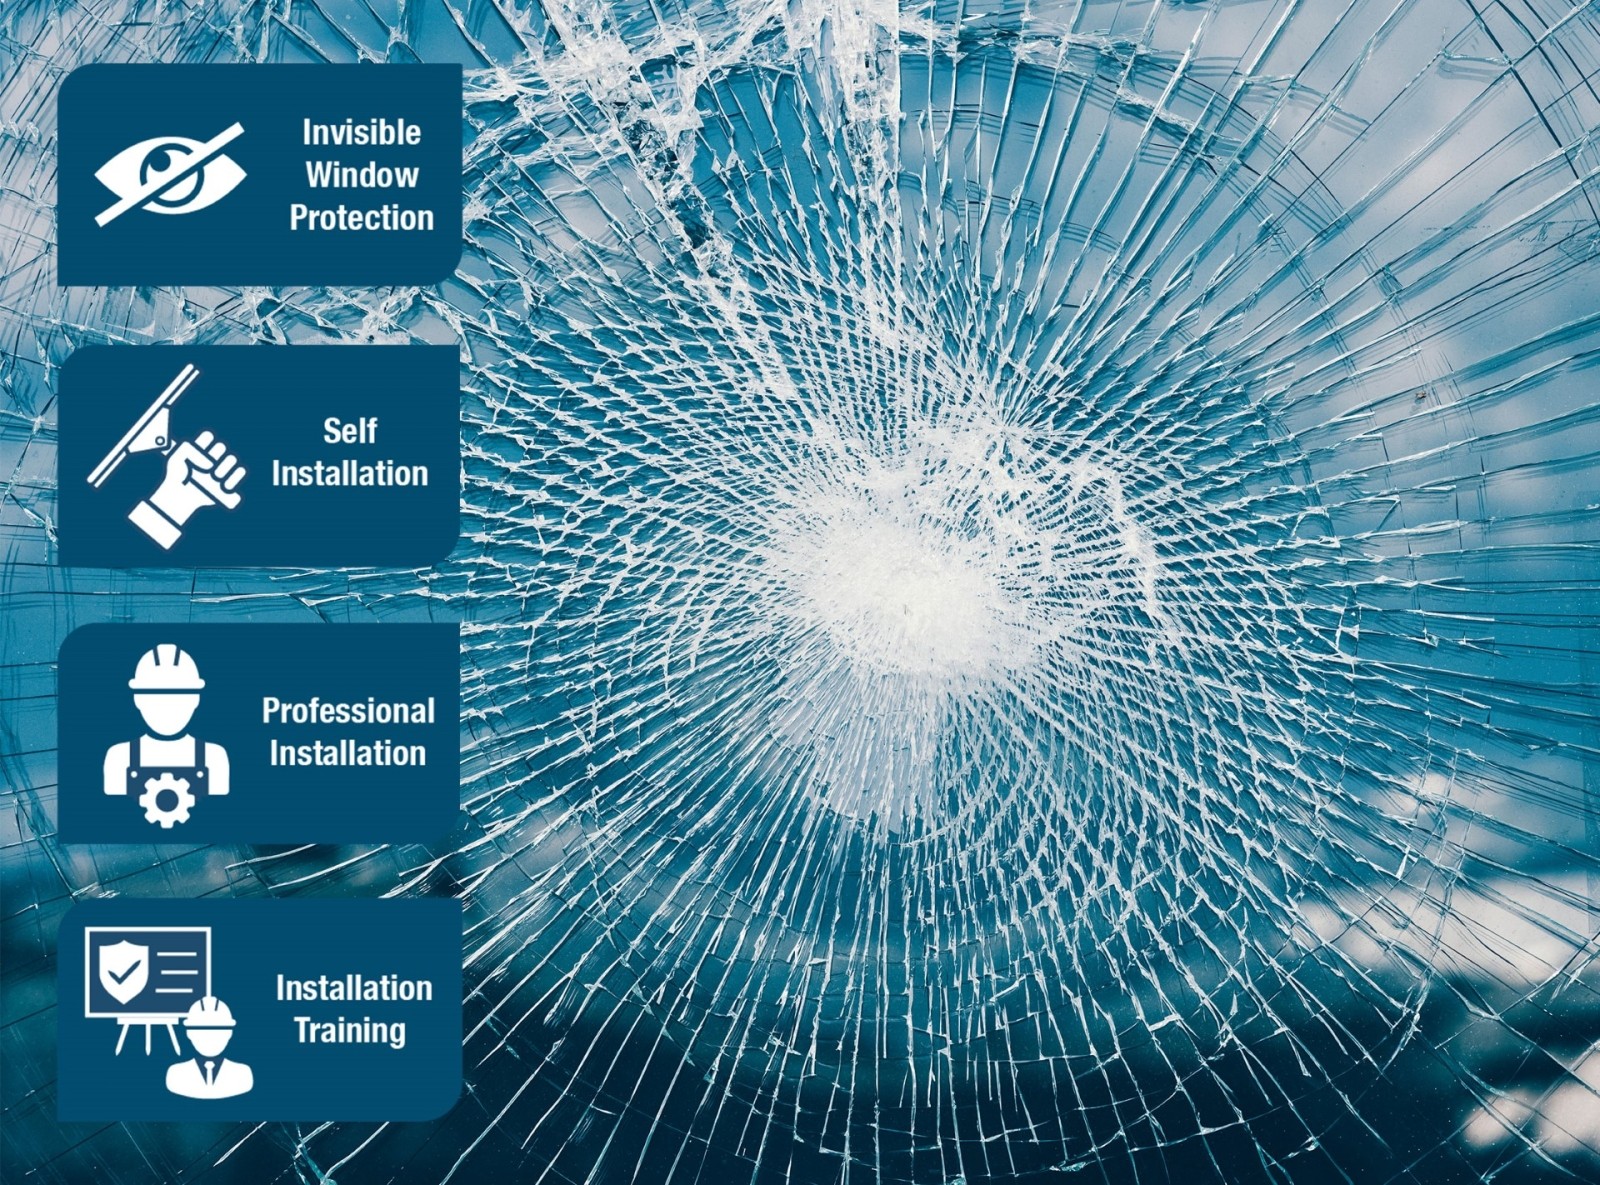 Solarglide Safety Film demonstrating onbaord fractured glass